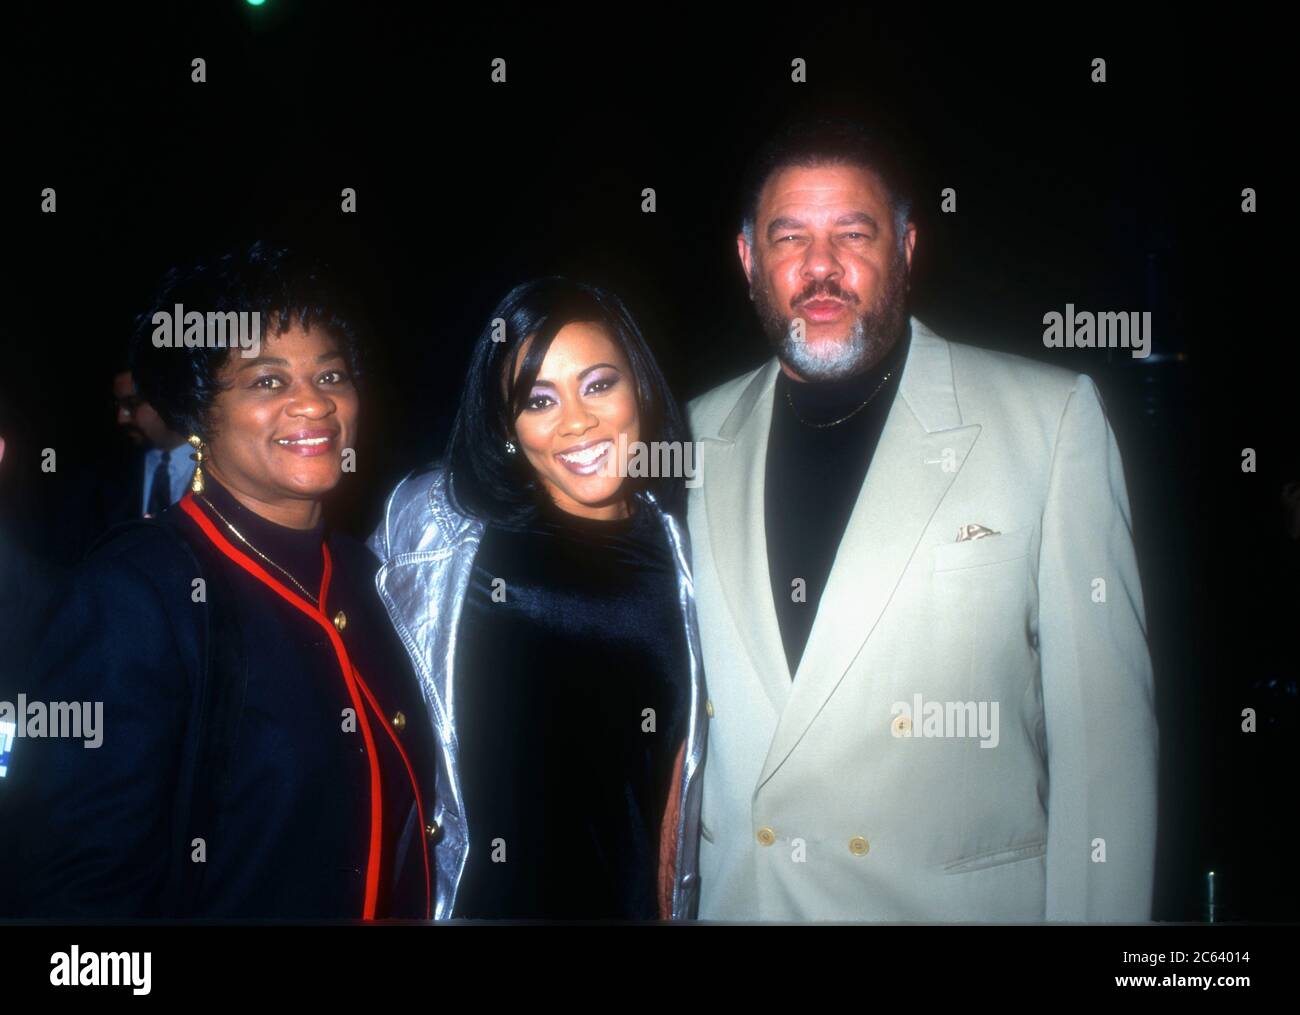 Beverly Hills, California, USA 11th December 1995 Actress Lela Rochon and parents mother Zelma Staples and father Samuel Staples attend 20th Century Fox' 'Waiting To Exhale' Premiere on December 11, 1995 at Samuel Goldwyn Theatre in Beverly Hills, California, USA. Photo by Barry King/Alamy Stock Photo Stock Photo